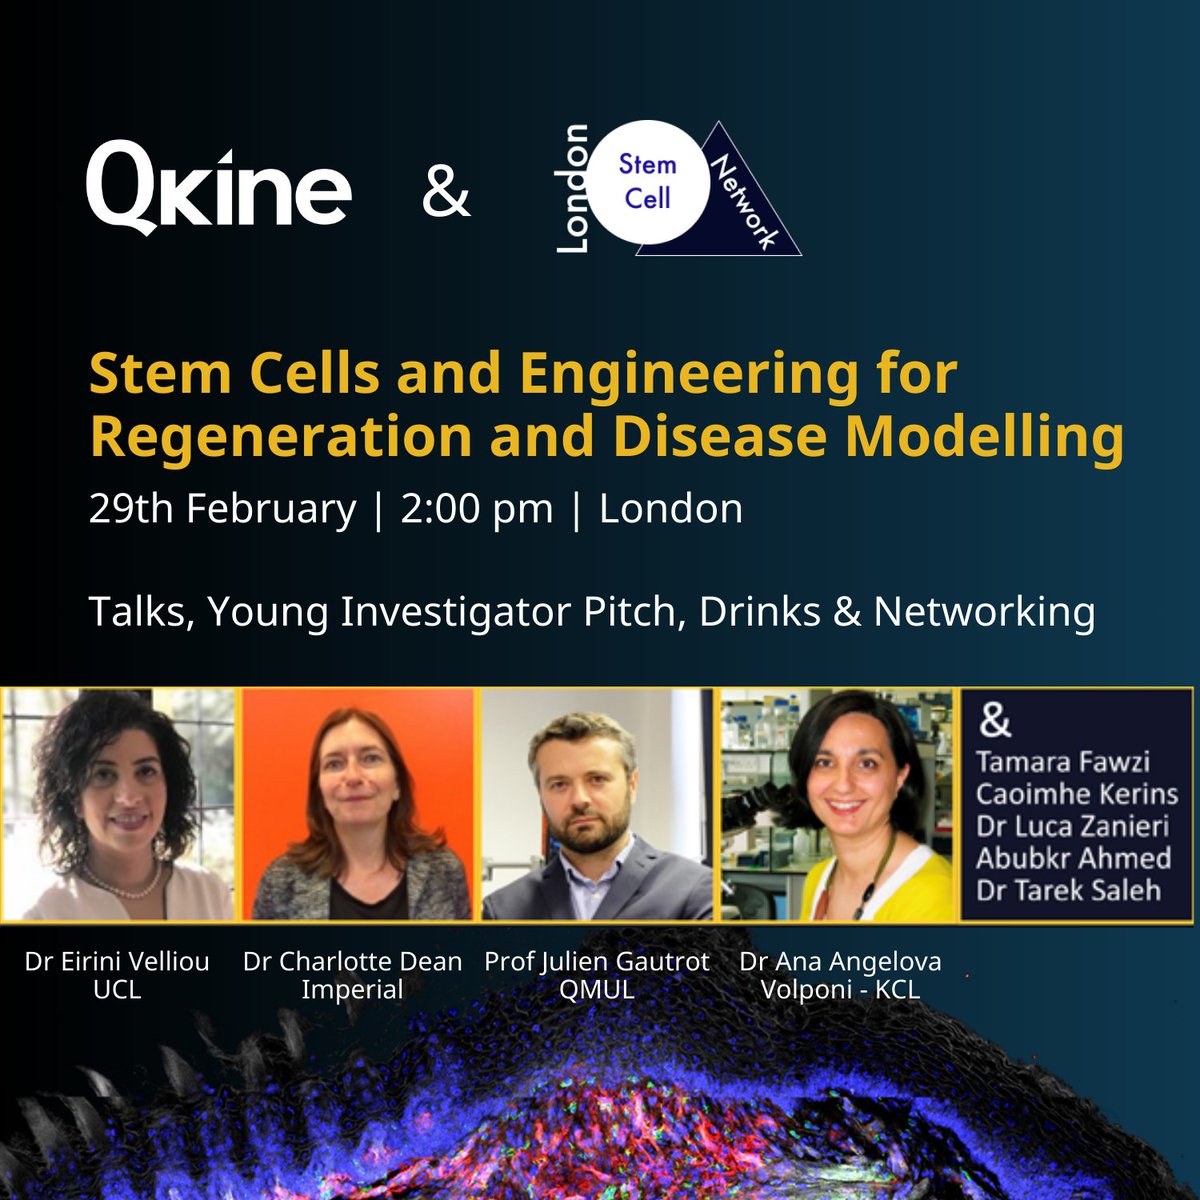 Don't miss our upcoming workshop with @LSCN_UK! Enter our image competition showcasing your research in Regeneration and Disease Modelling. Register and submit your image here: zurl.co/cXaN #StemCells #Research #Workshop #RegenerativeMedicine #TissueEngineering